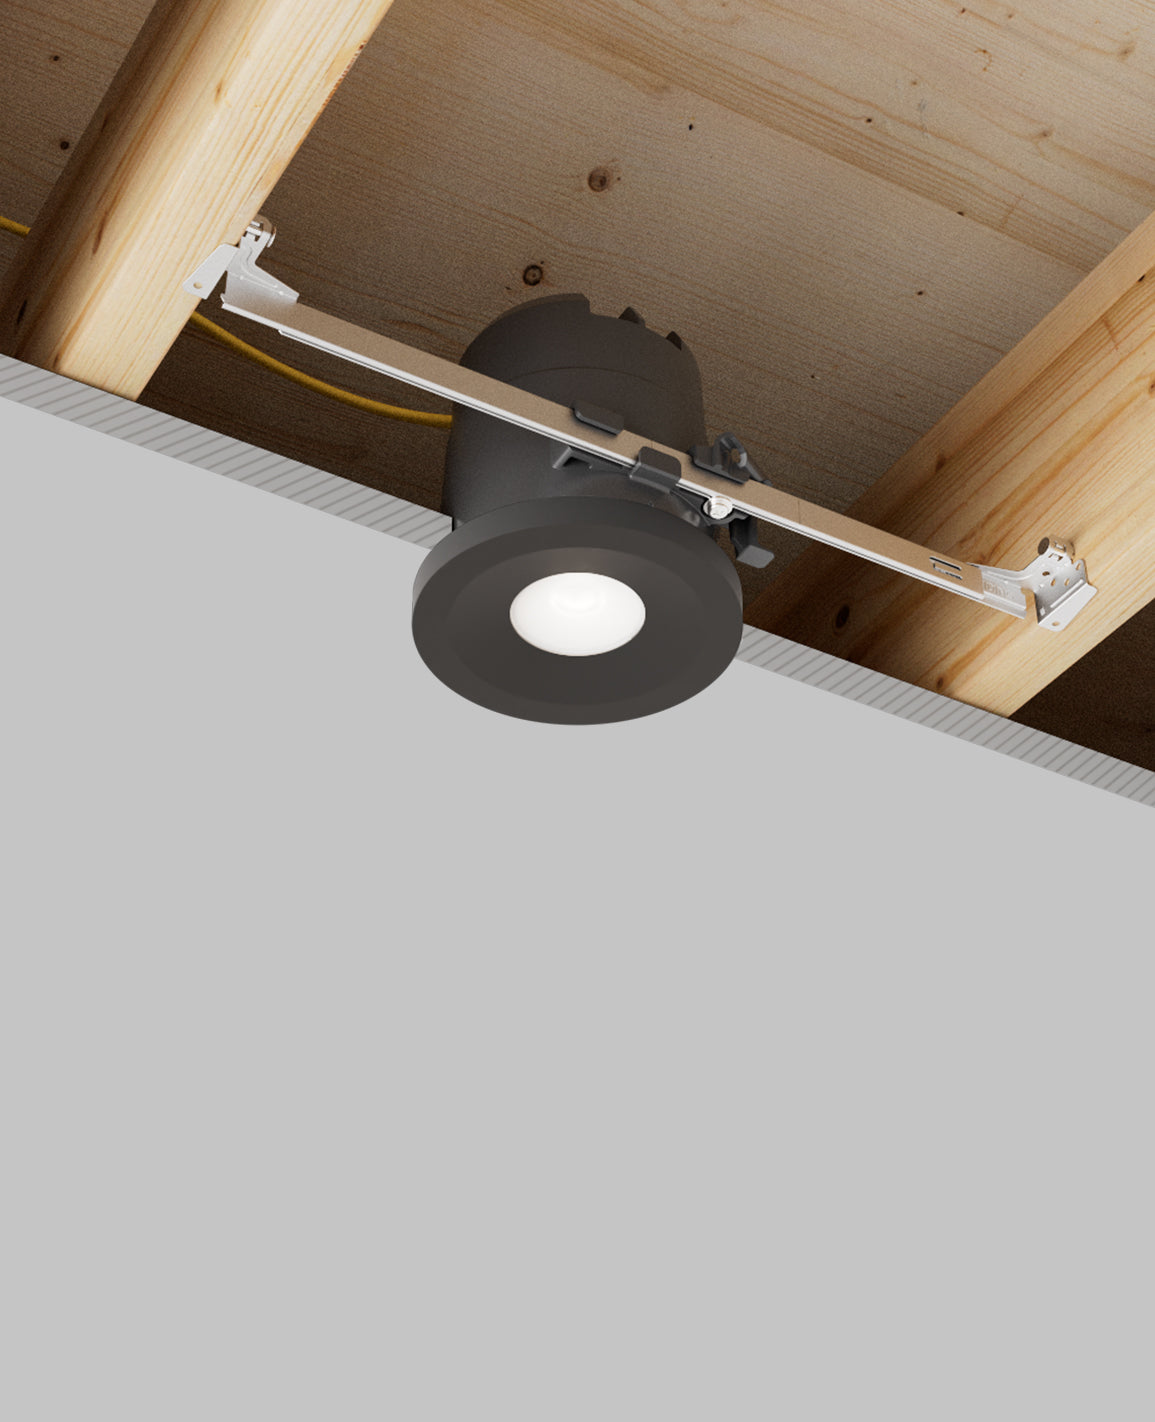 LUSA 4" recessed light with bar hangers housing and black surface trim